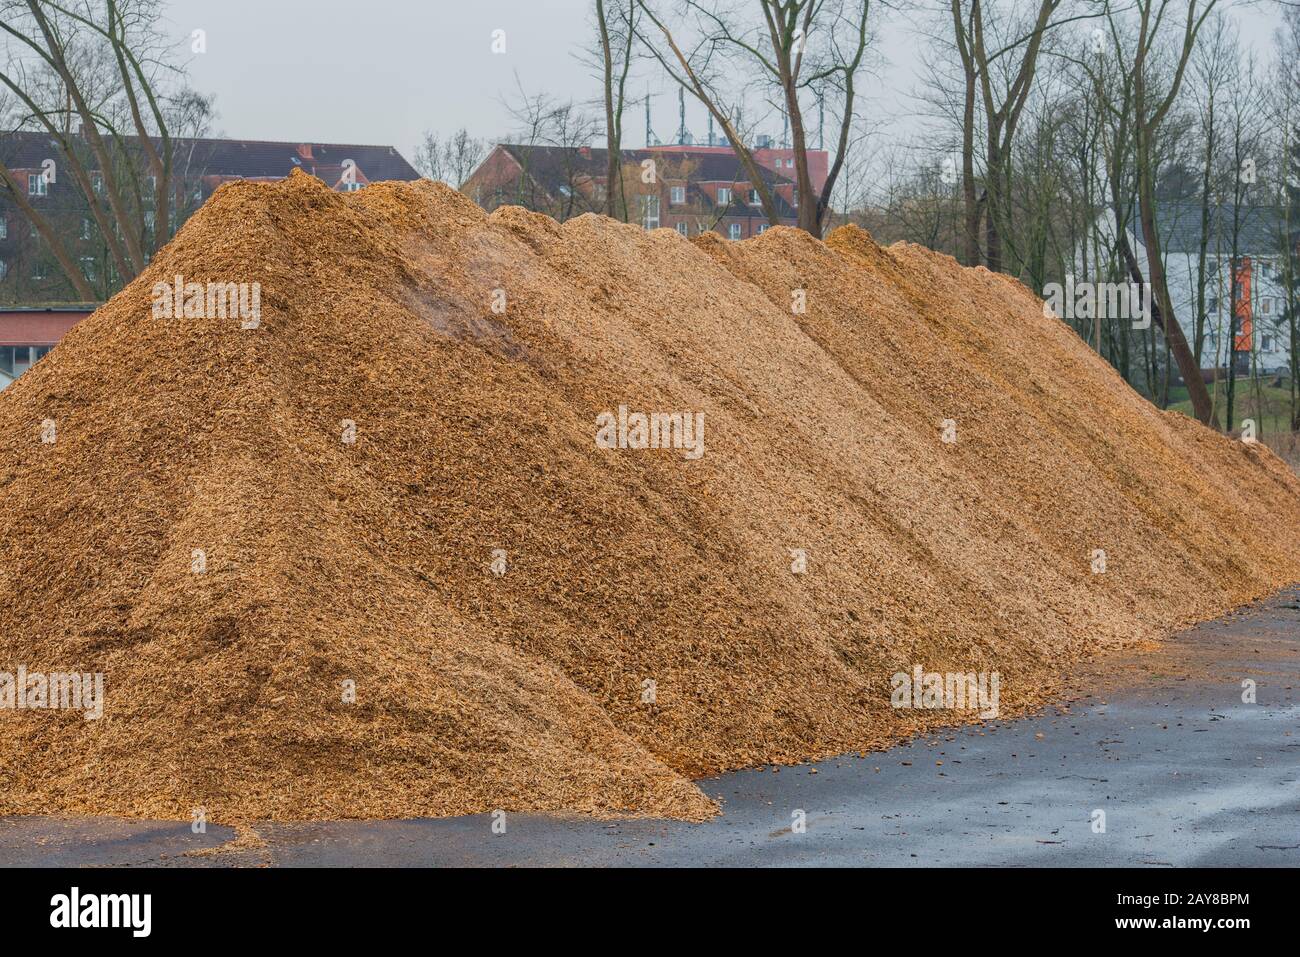 Big pile of wood shavings and wood mulch Stock Photo